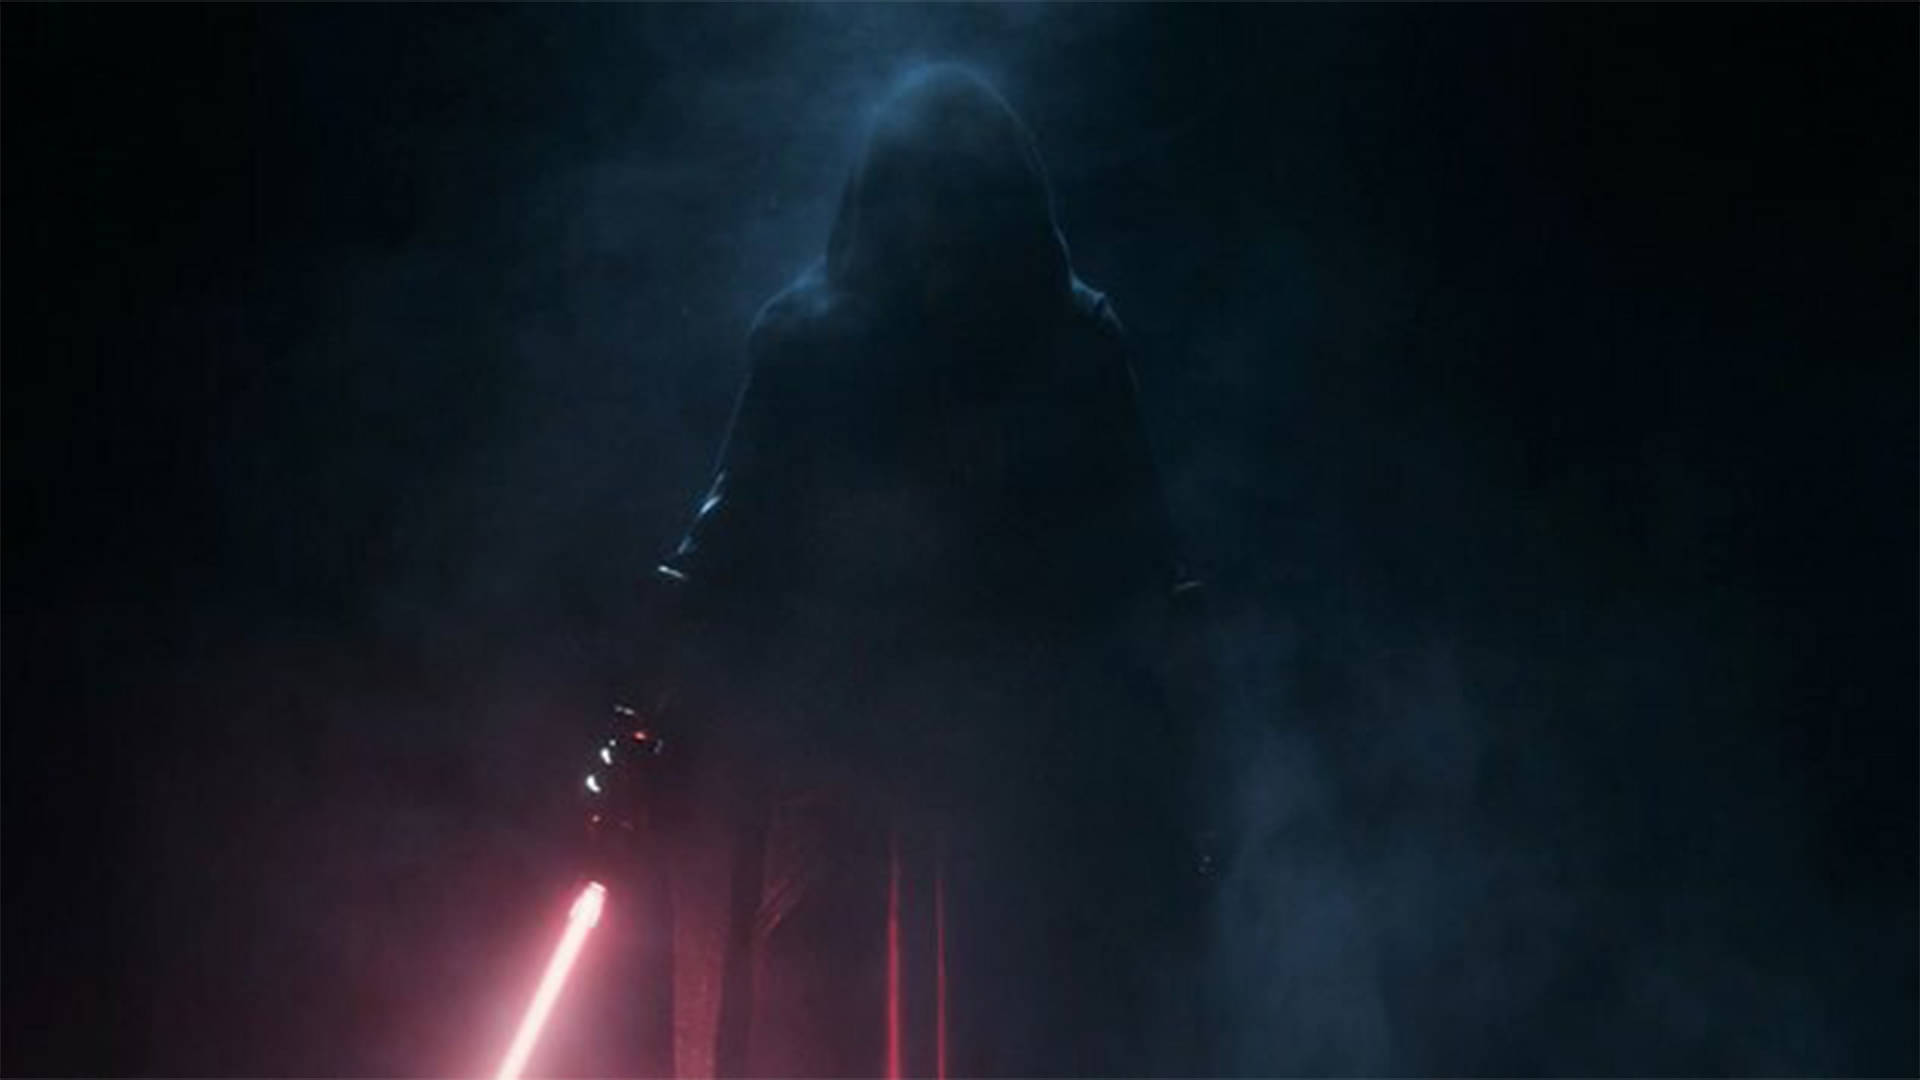 A Sith Lord in an enigmatic smoke screen